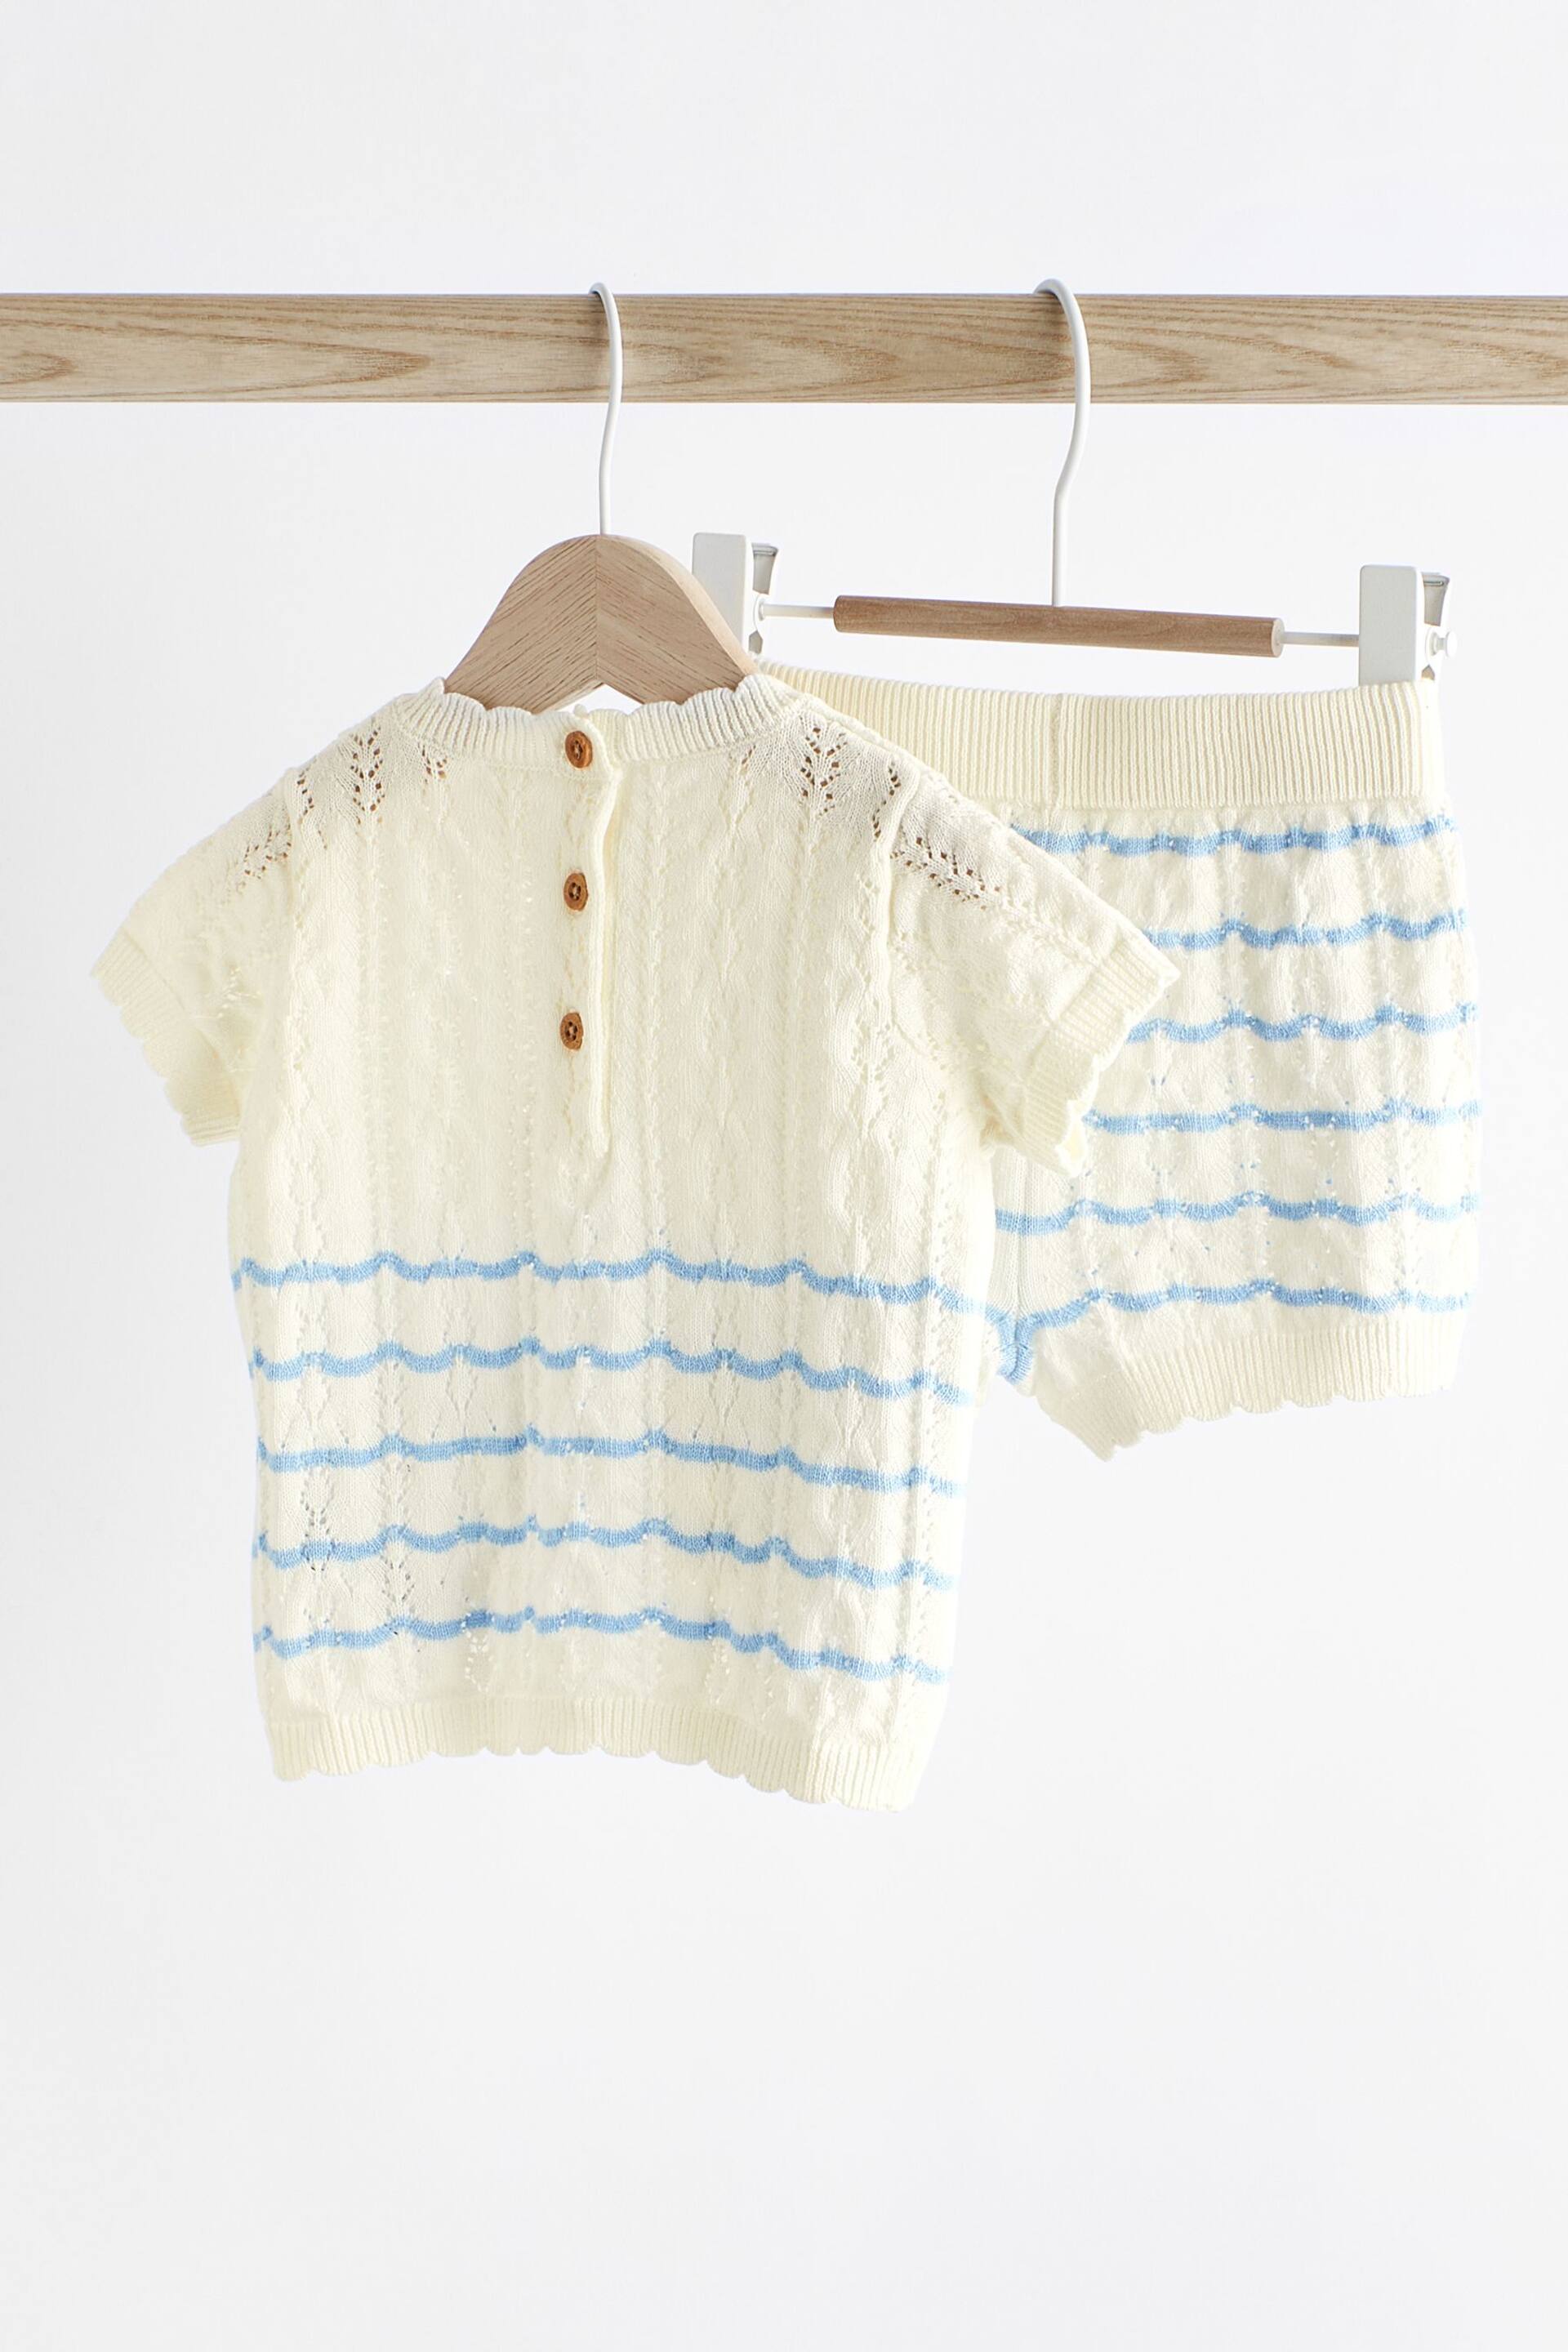 White/Blue Stripe Baby Knitted Top and Shorts Set (0mths-2yrs) - Image 2 of 11